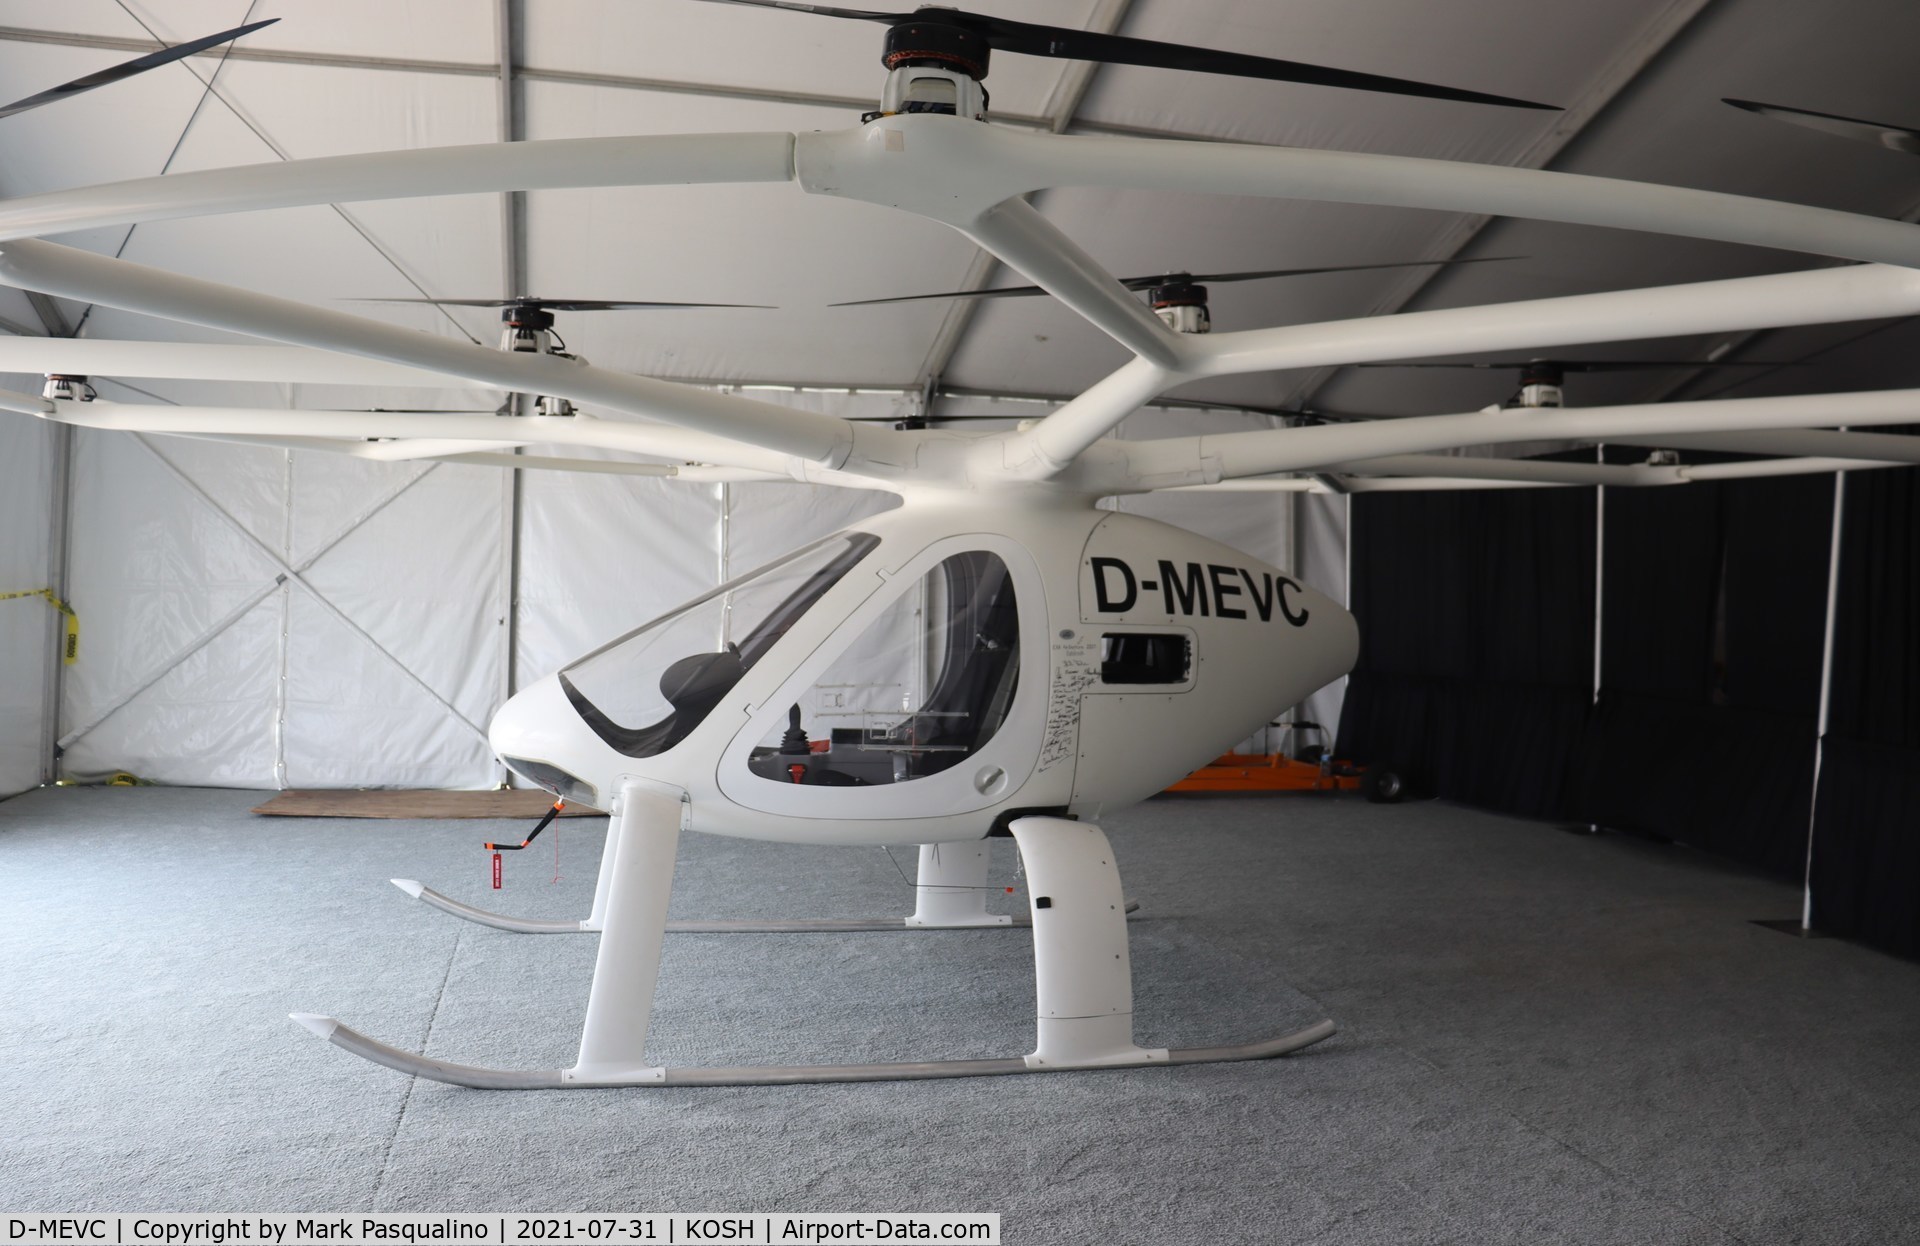 D-MEVC, E-VOLO Volocopter C/N Unknown D-MEVC, Volocopter